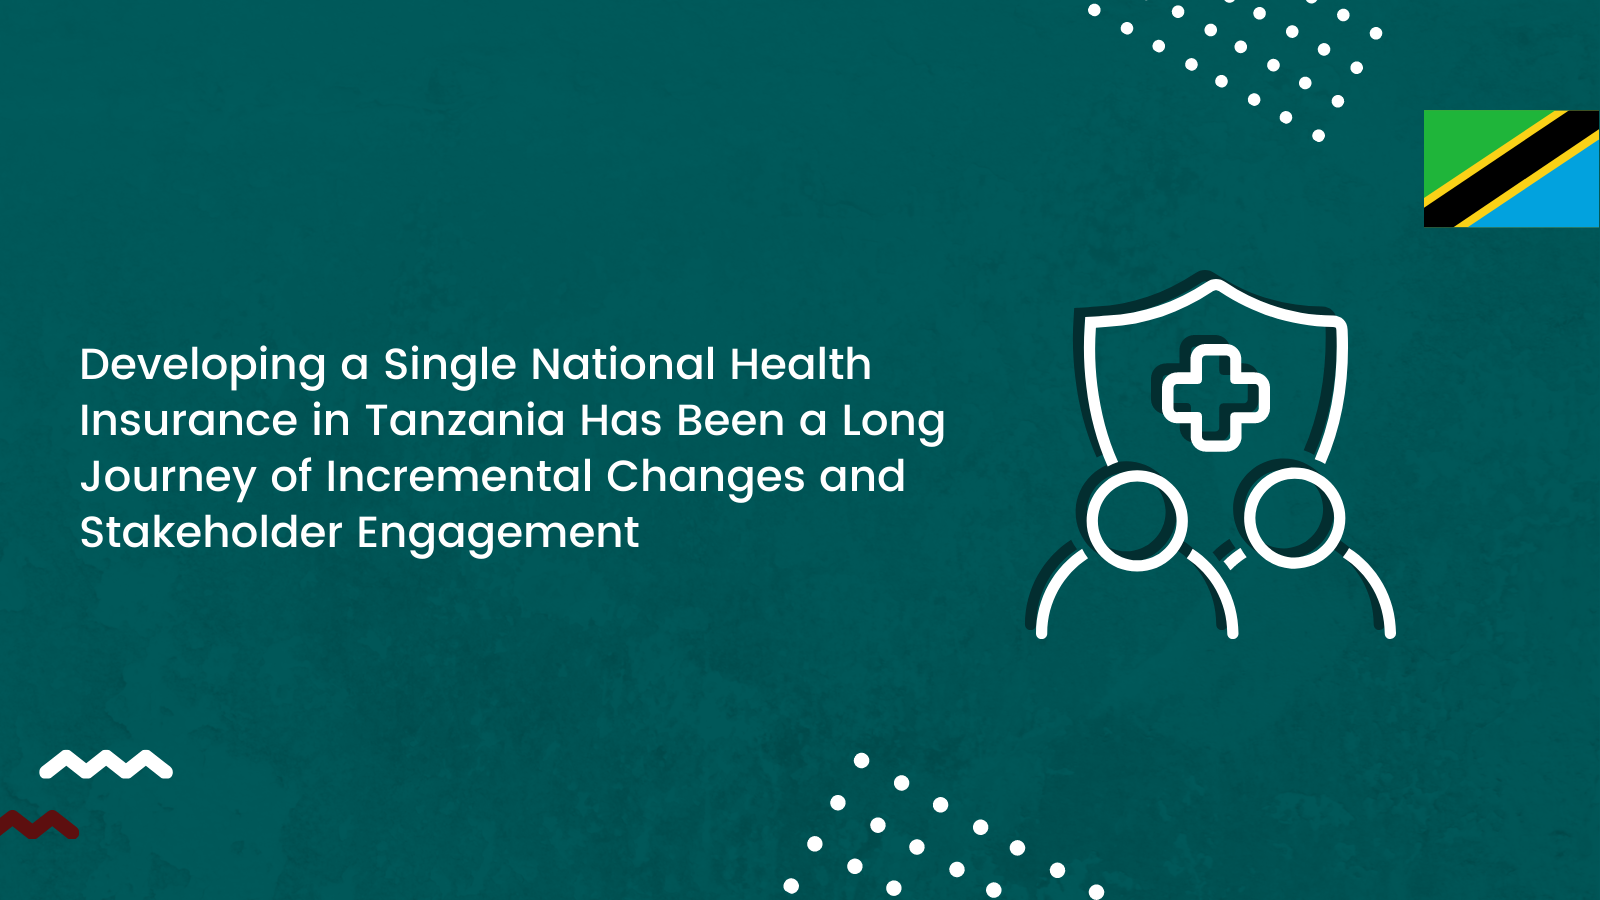 Developing a Single National Health Insurance in Tanzania Has Been a Long Journey of Incremental Changes and Stakeholder Engagement